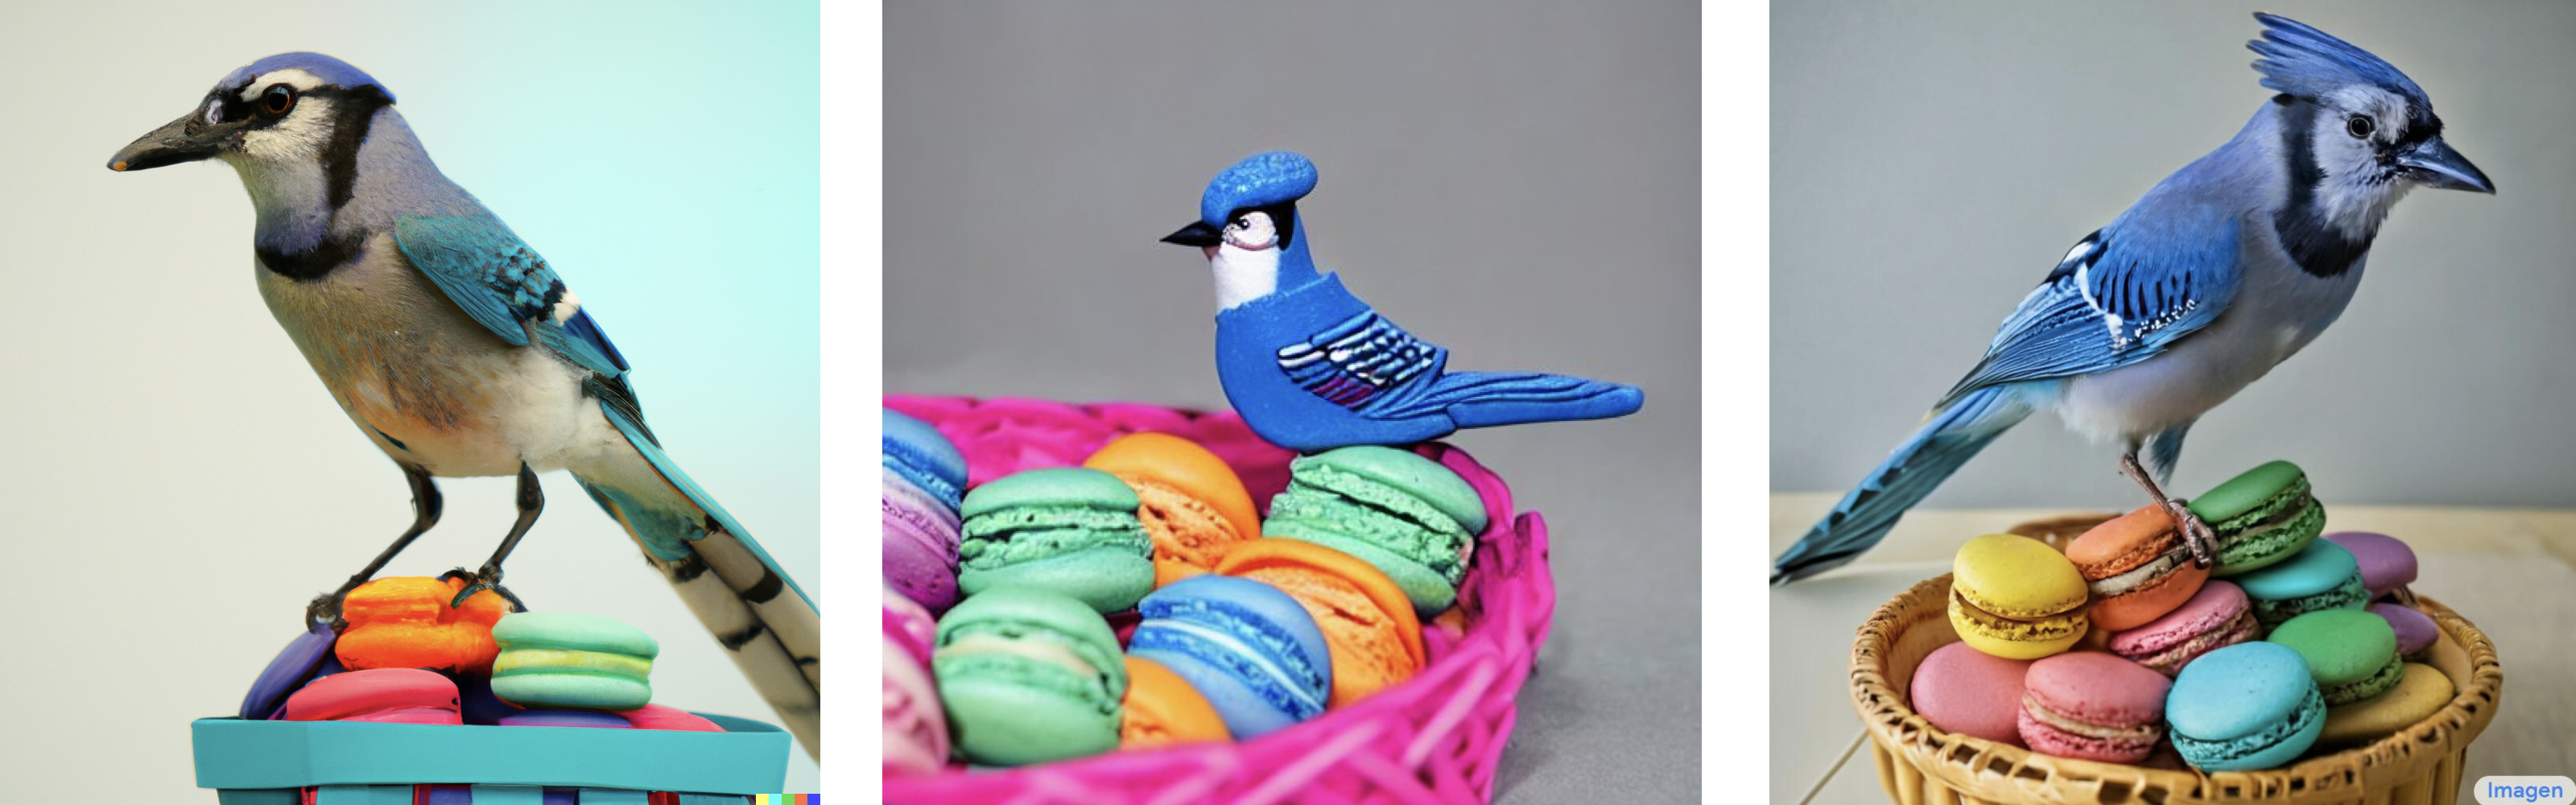 A blue jay standing on a large basket of rainbow macarons